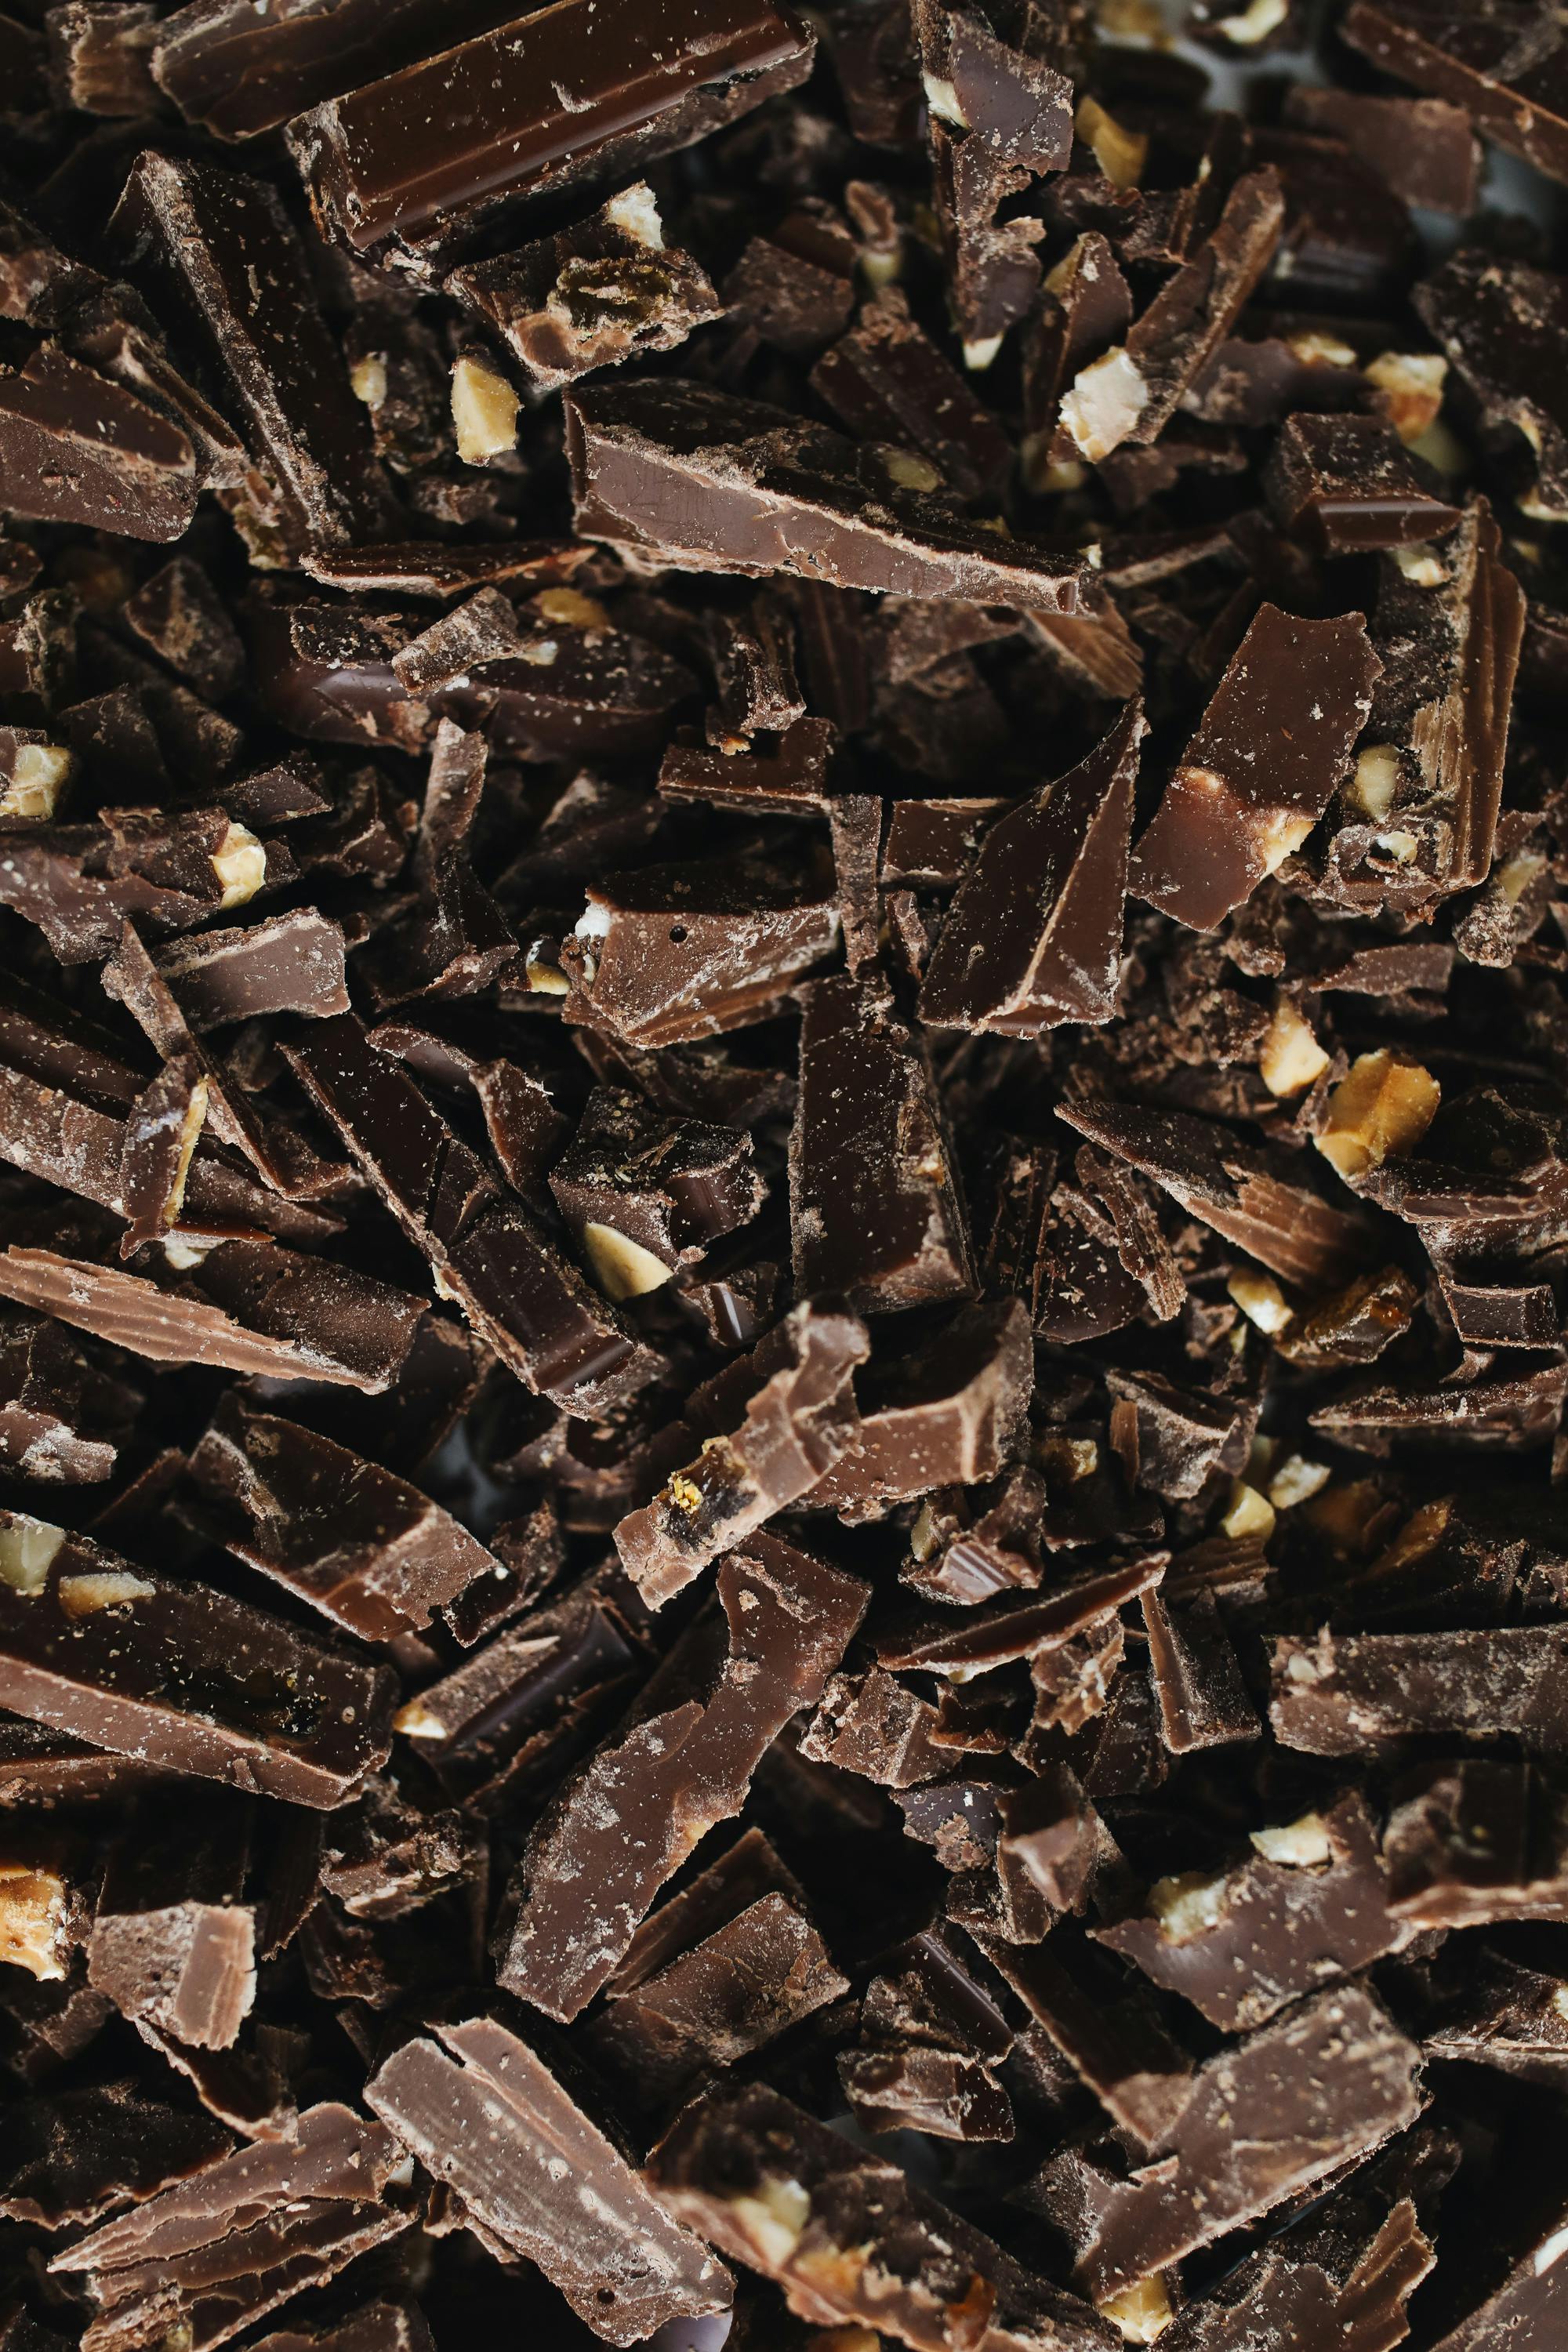 chocolate brown backgrounds